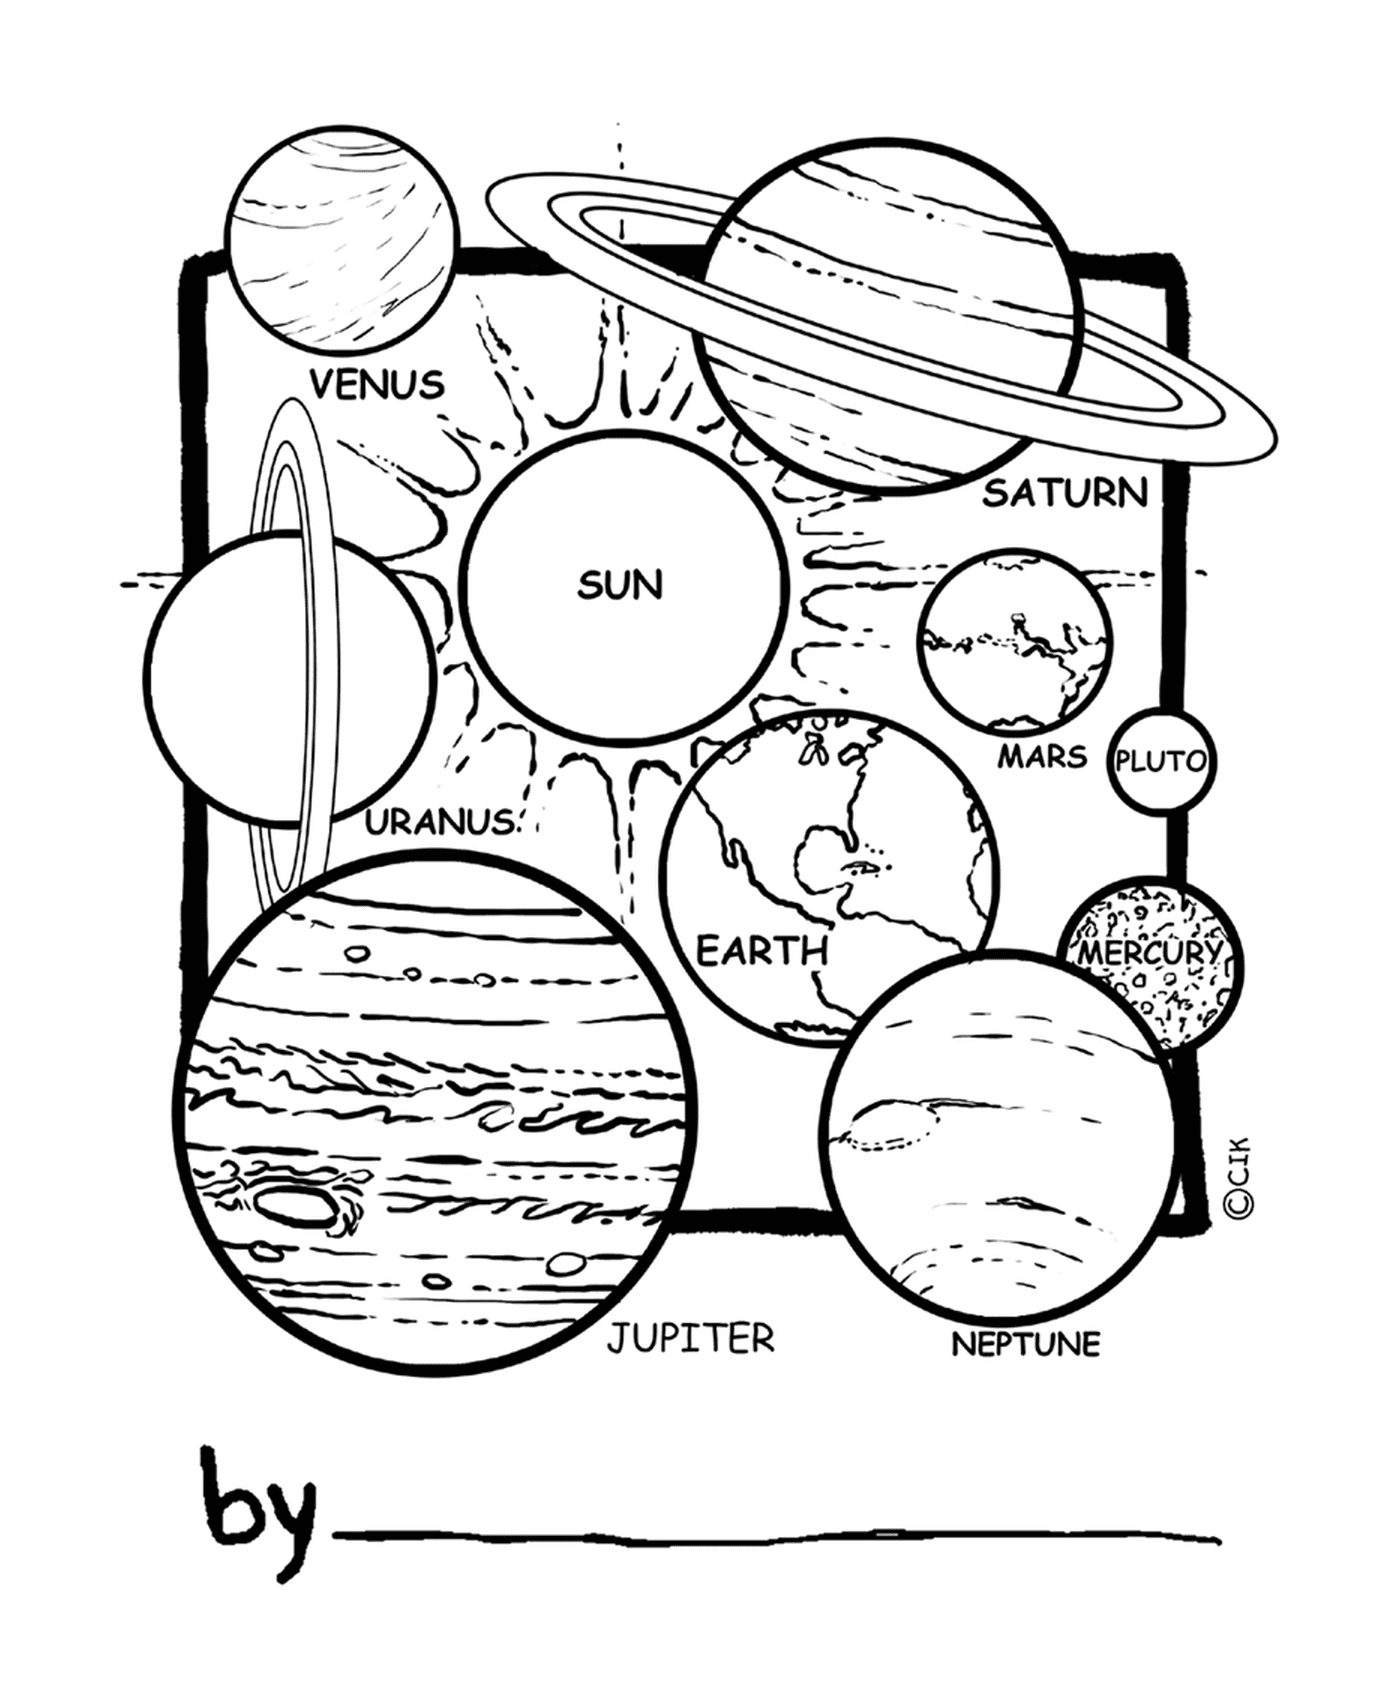  Planets of the solar system 